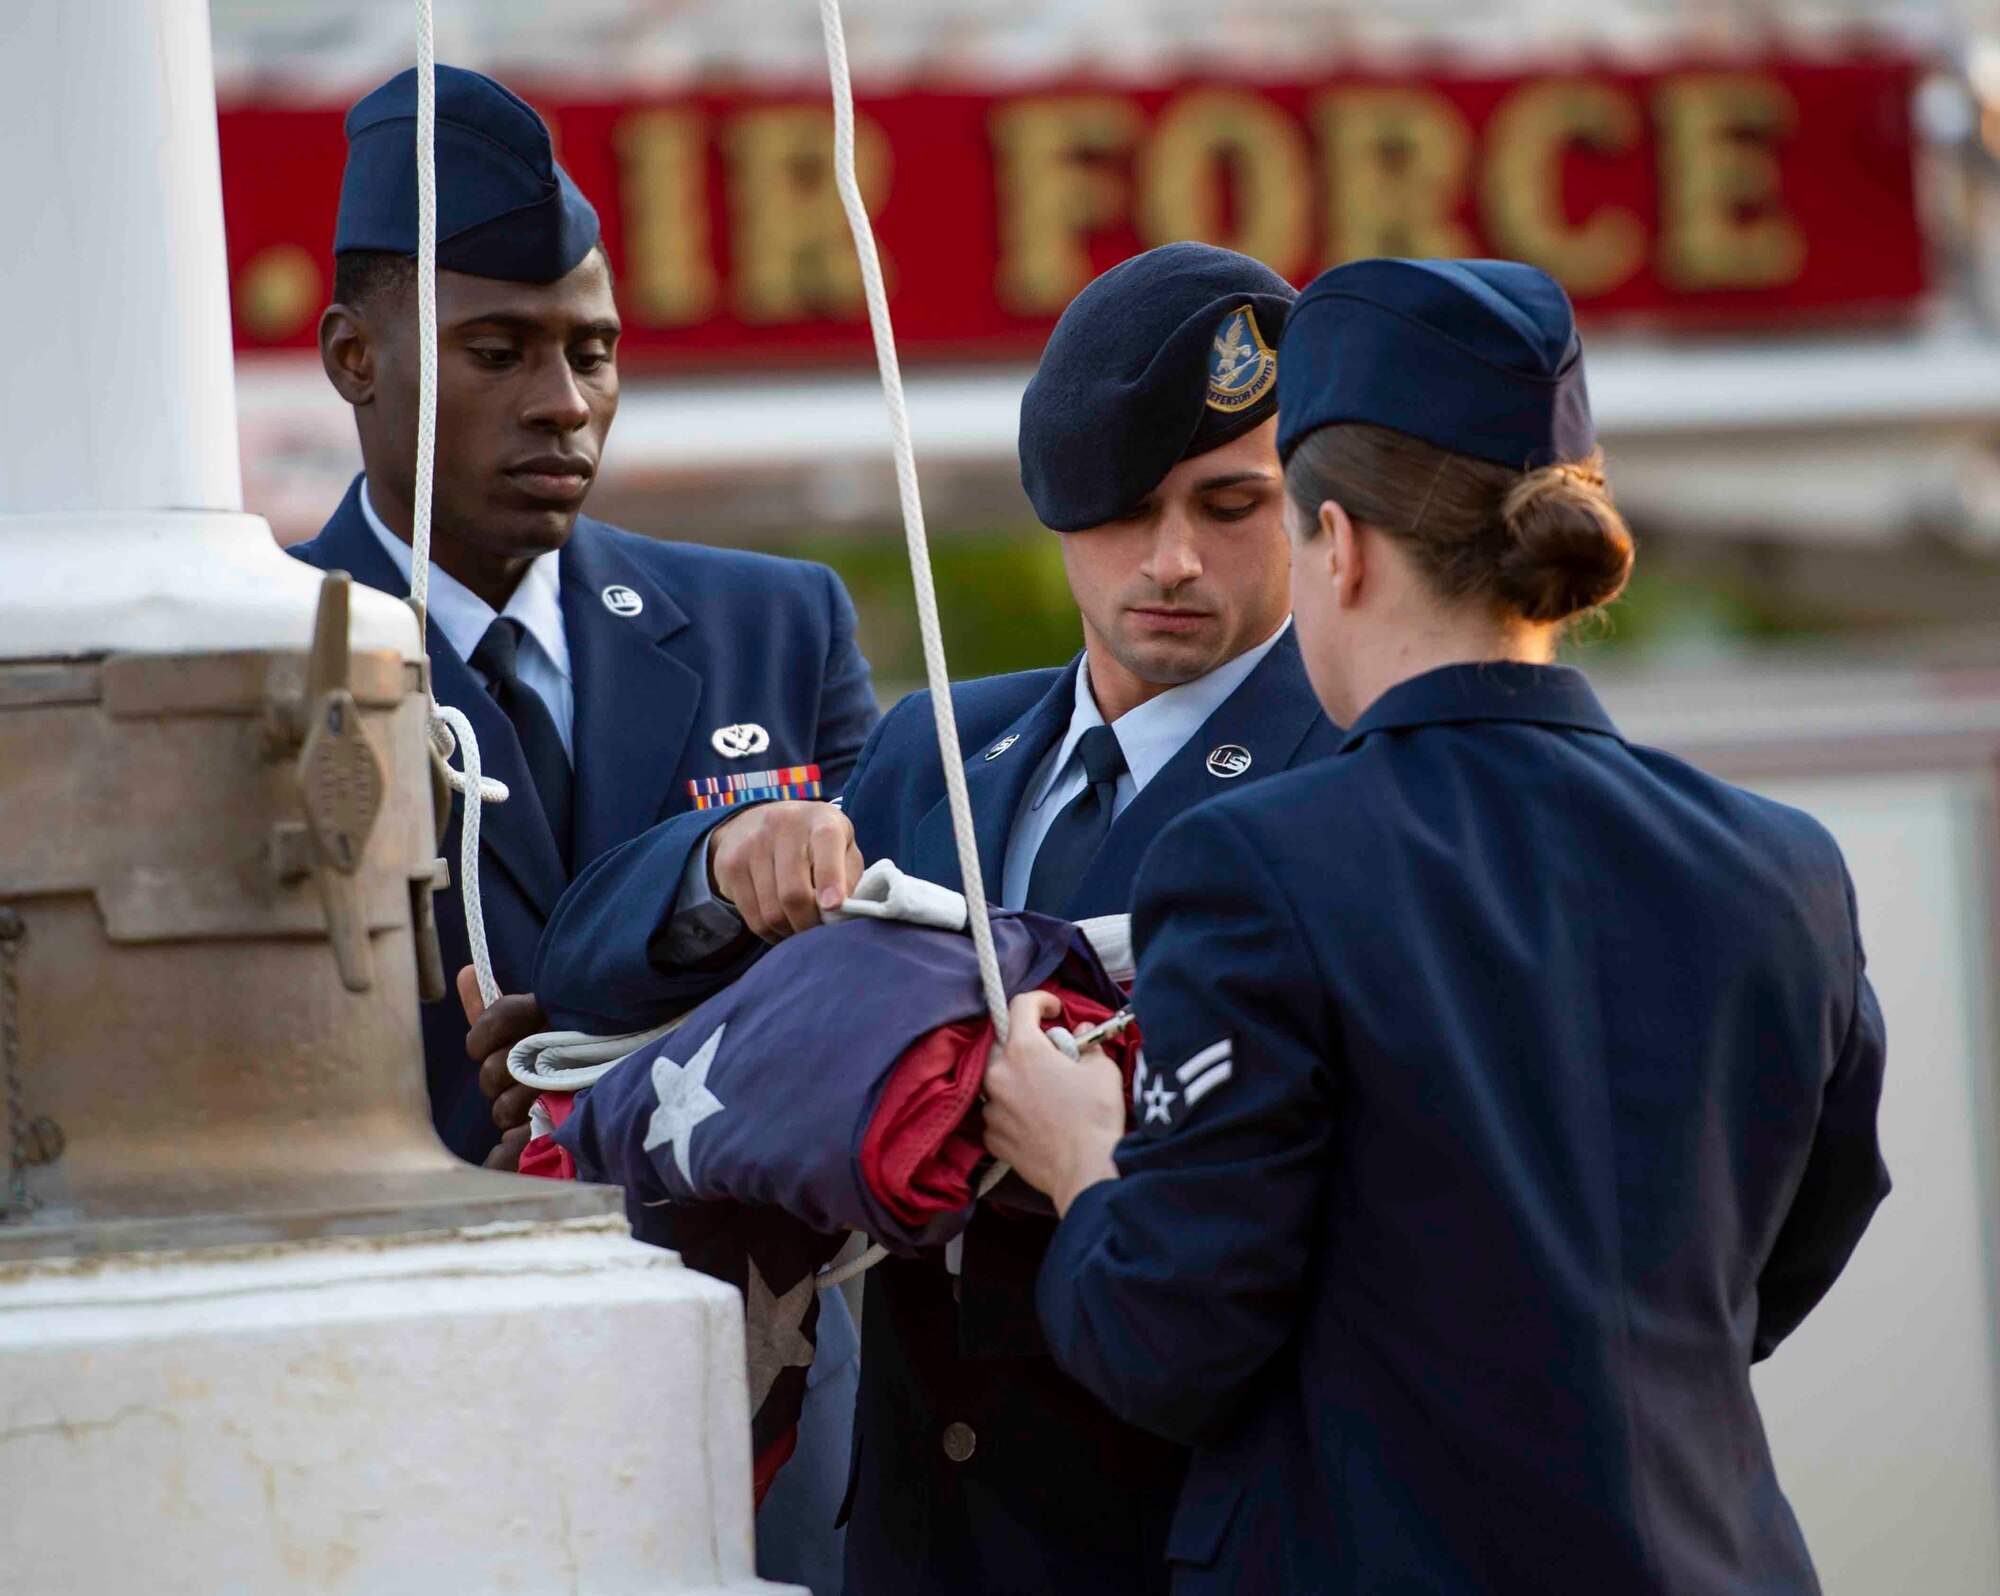 Airman Leadership School students raise the flag during a 9/11 memorial ceremony, Sept. 11, 2018, at Scott Air Force Base, Illinois. The flag was flown at half-staff in recognition of Patriot Day, a national day of mourning meant to honor the 2,996 victims of the 2001 terrorist attacks. (U.S. Air Force photo by Airman 1st Class Tara Stetler)